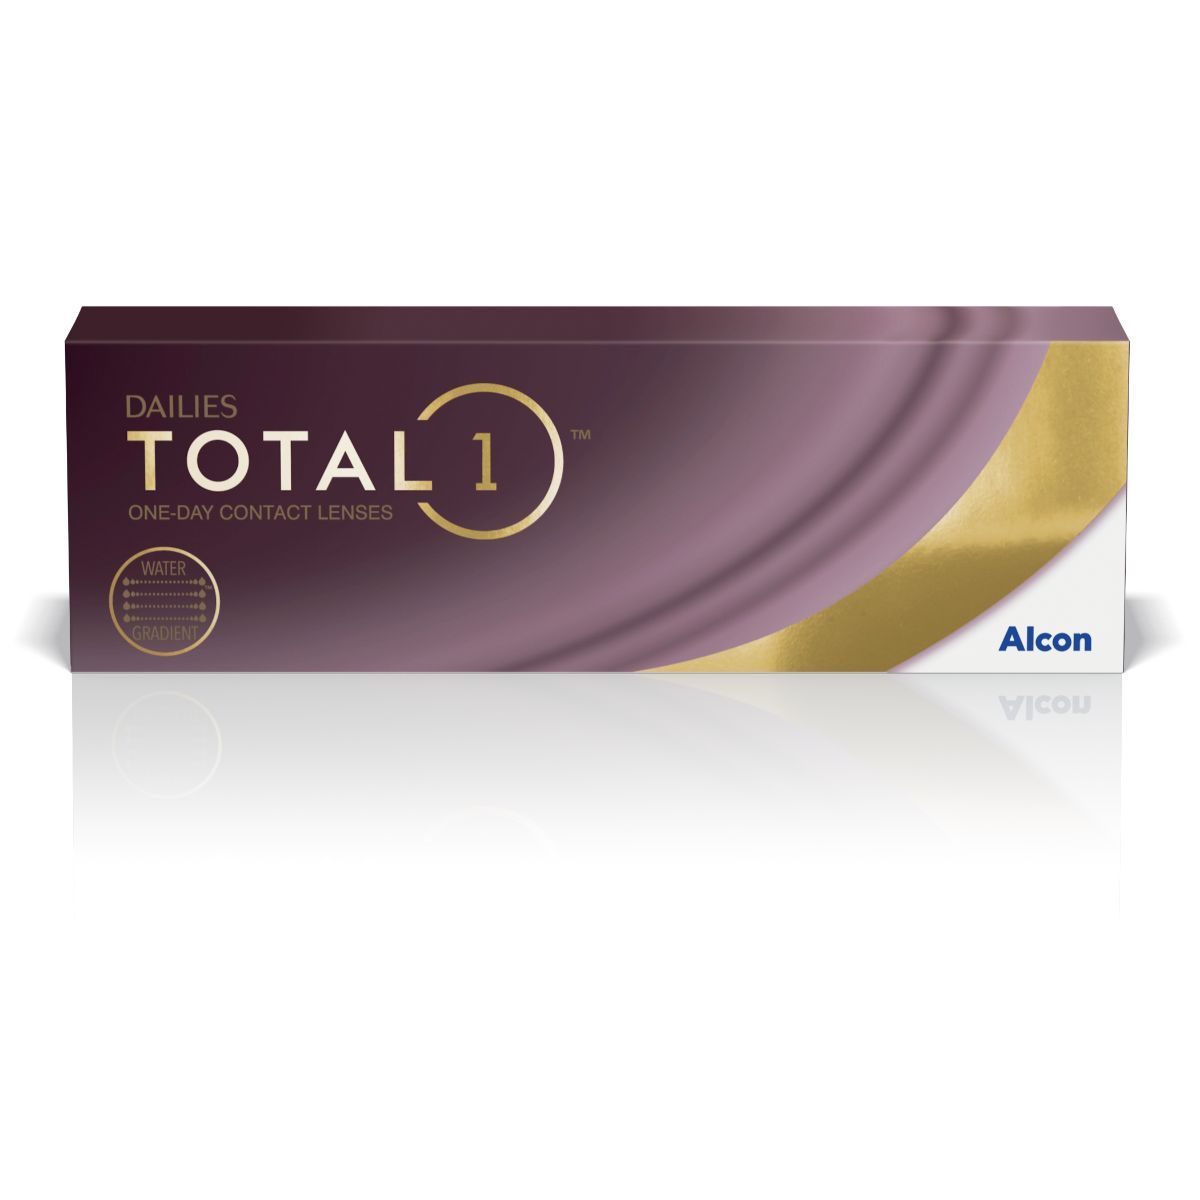 Dailies Total 1 Contact Lens - Daily